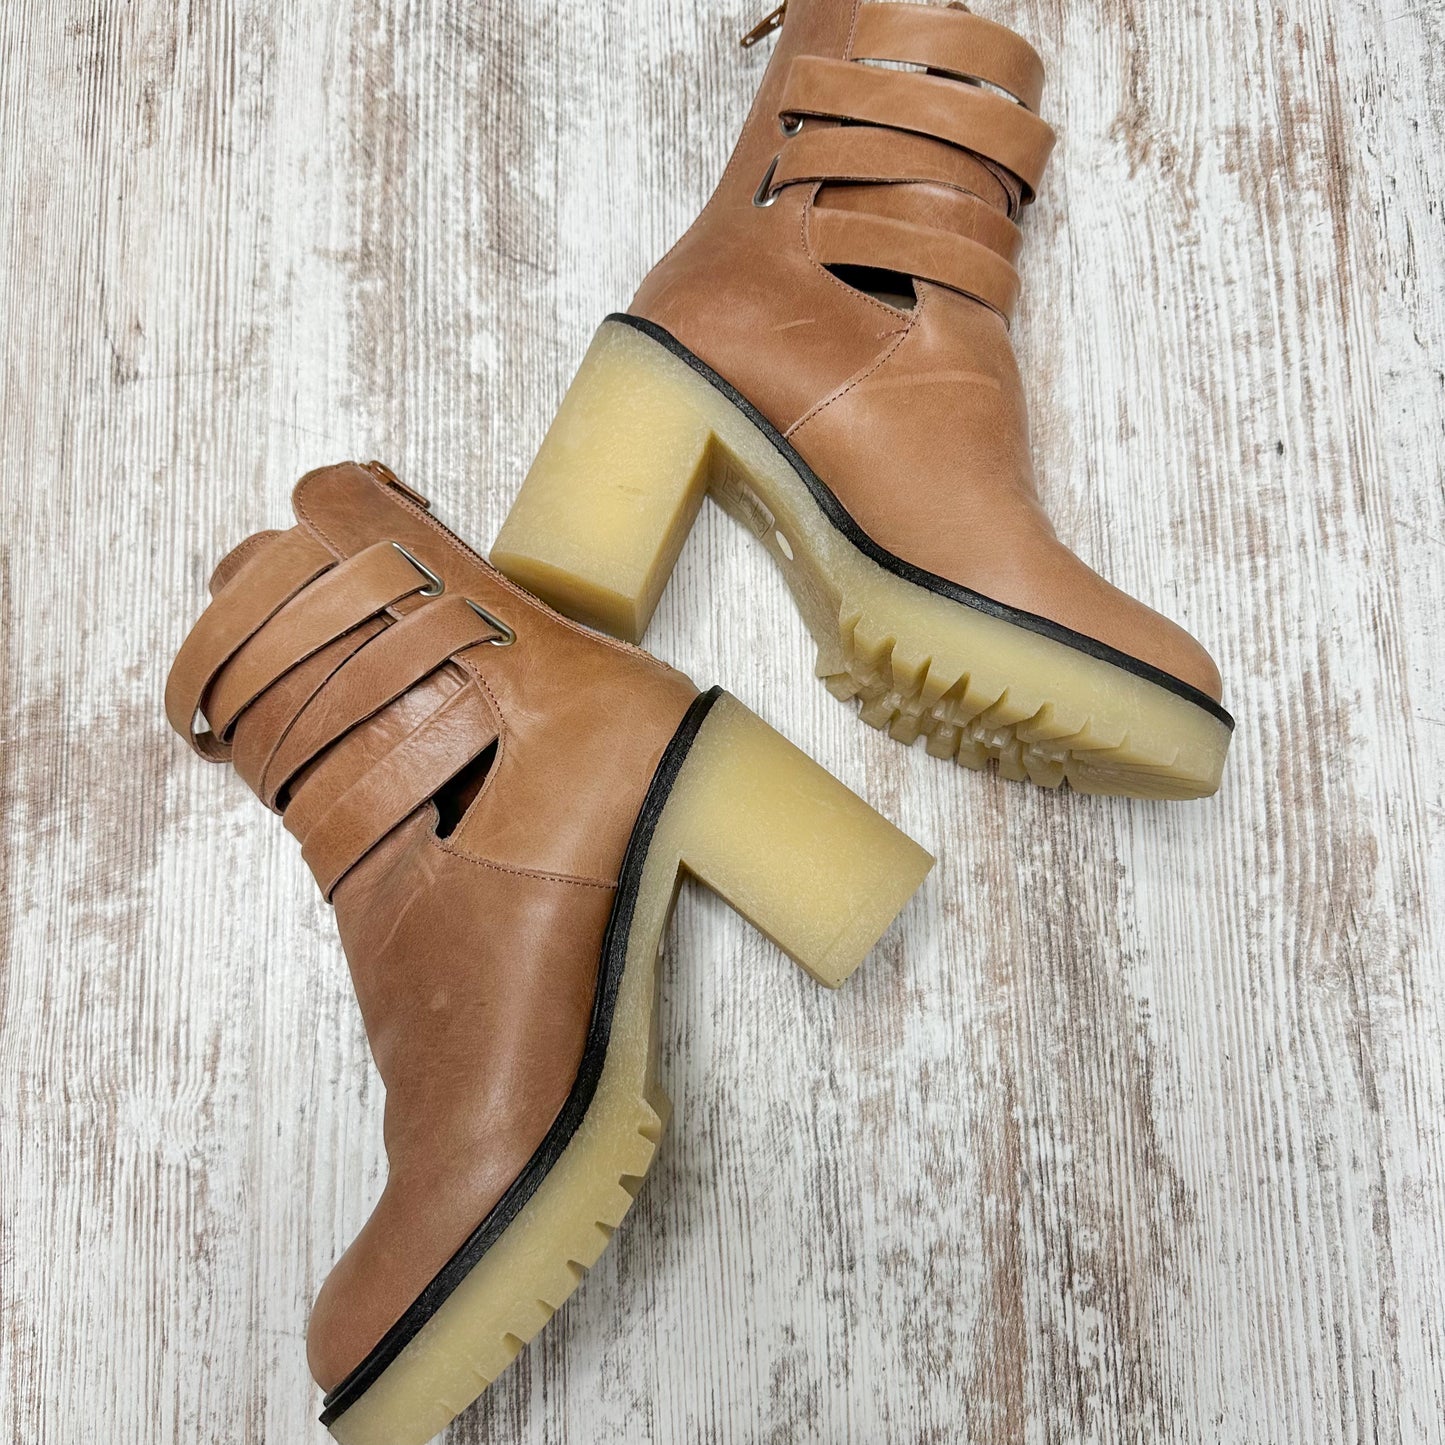 Free People Jesse Cut Out Boots in English Tan Size EU 36 - US 6